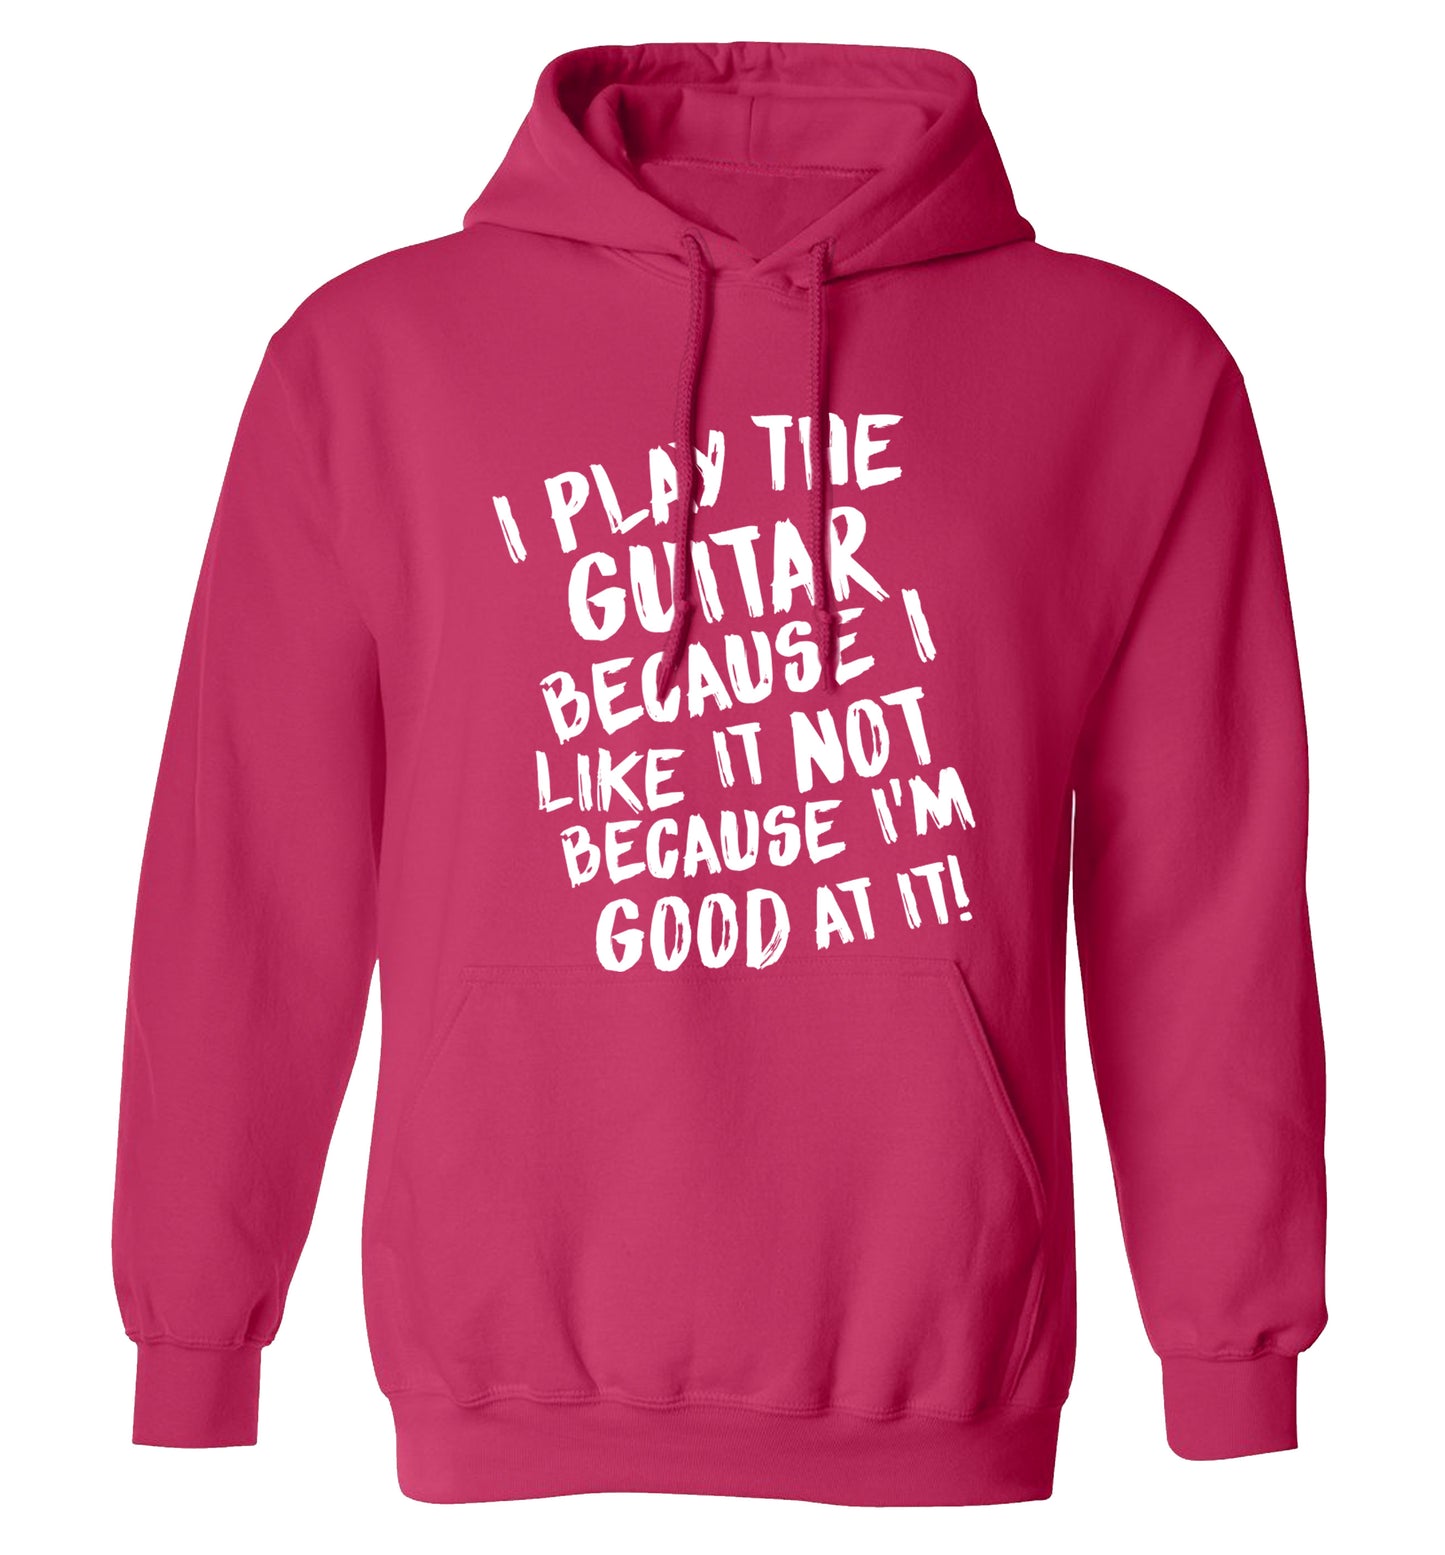 I play the guitar because I like it not because I'm good at it adults unisex pink hoodie 2XL